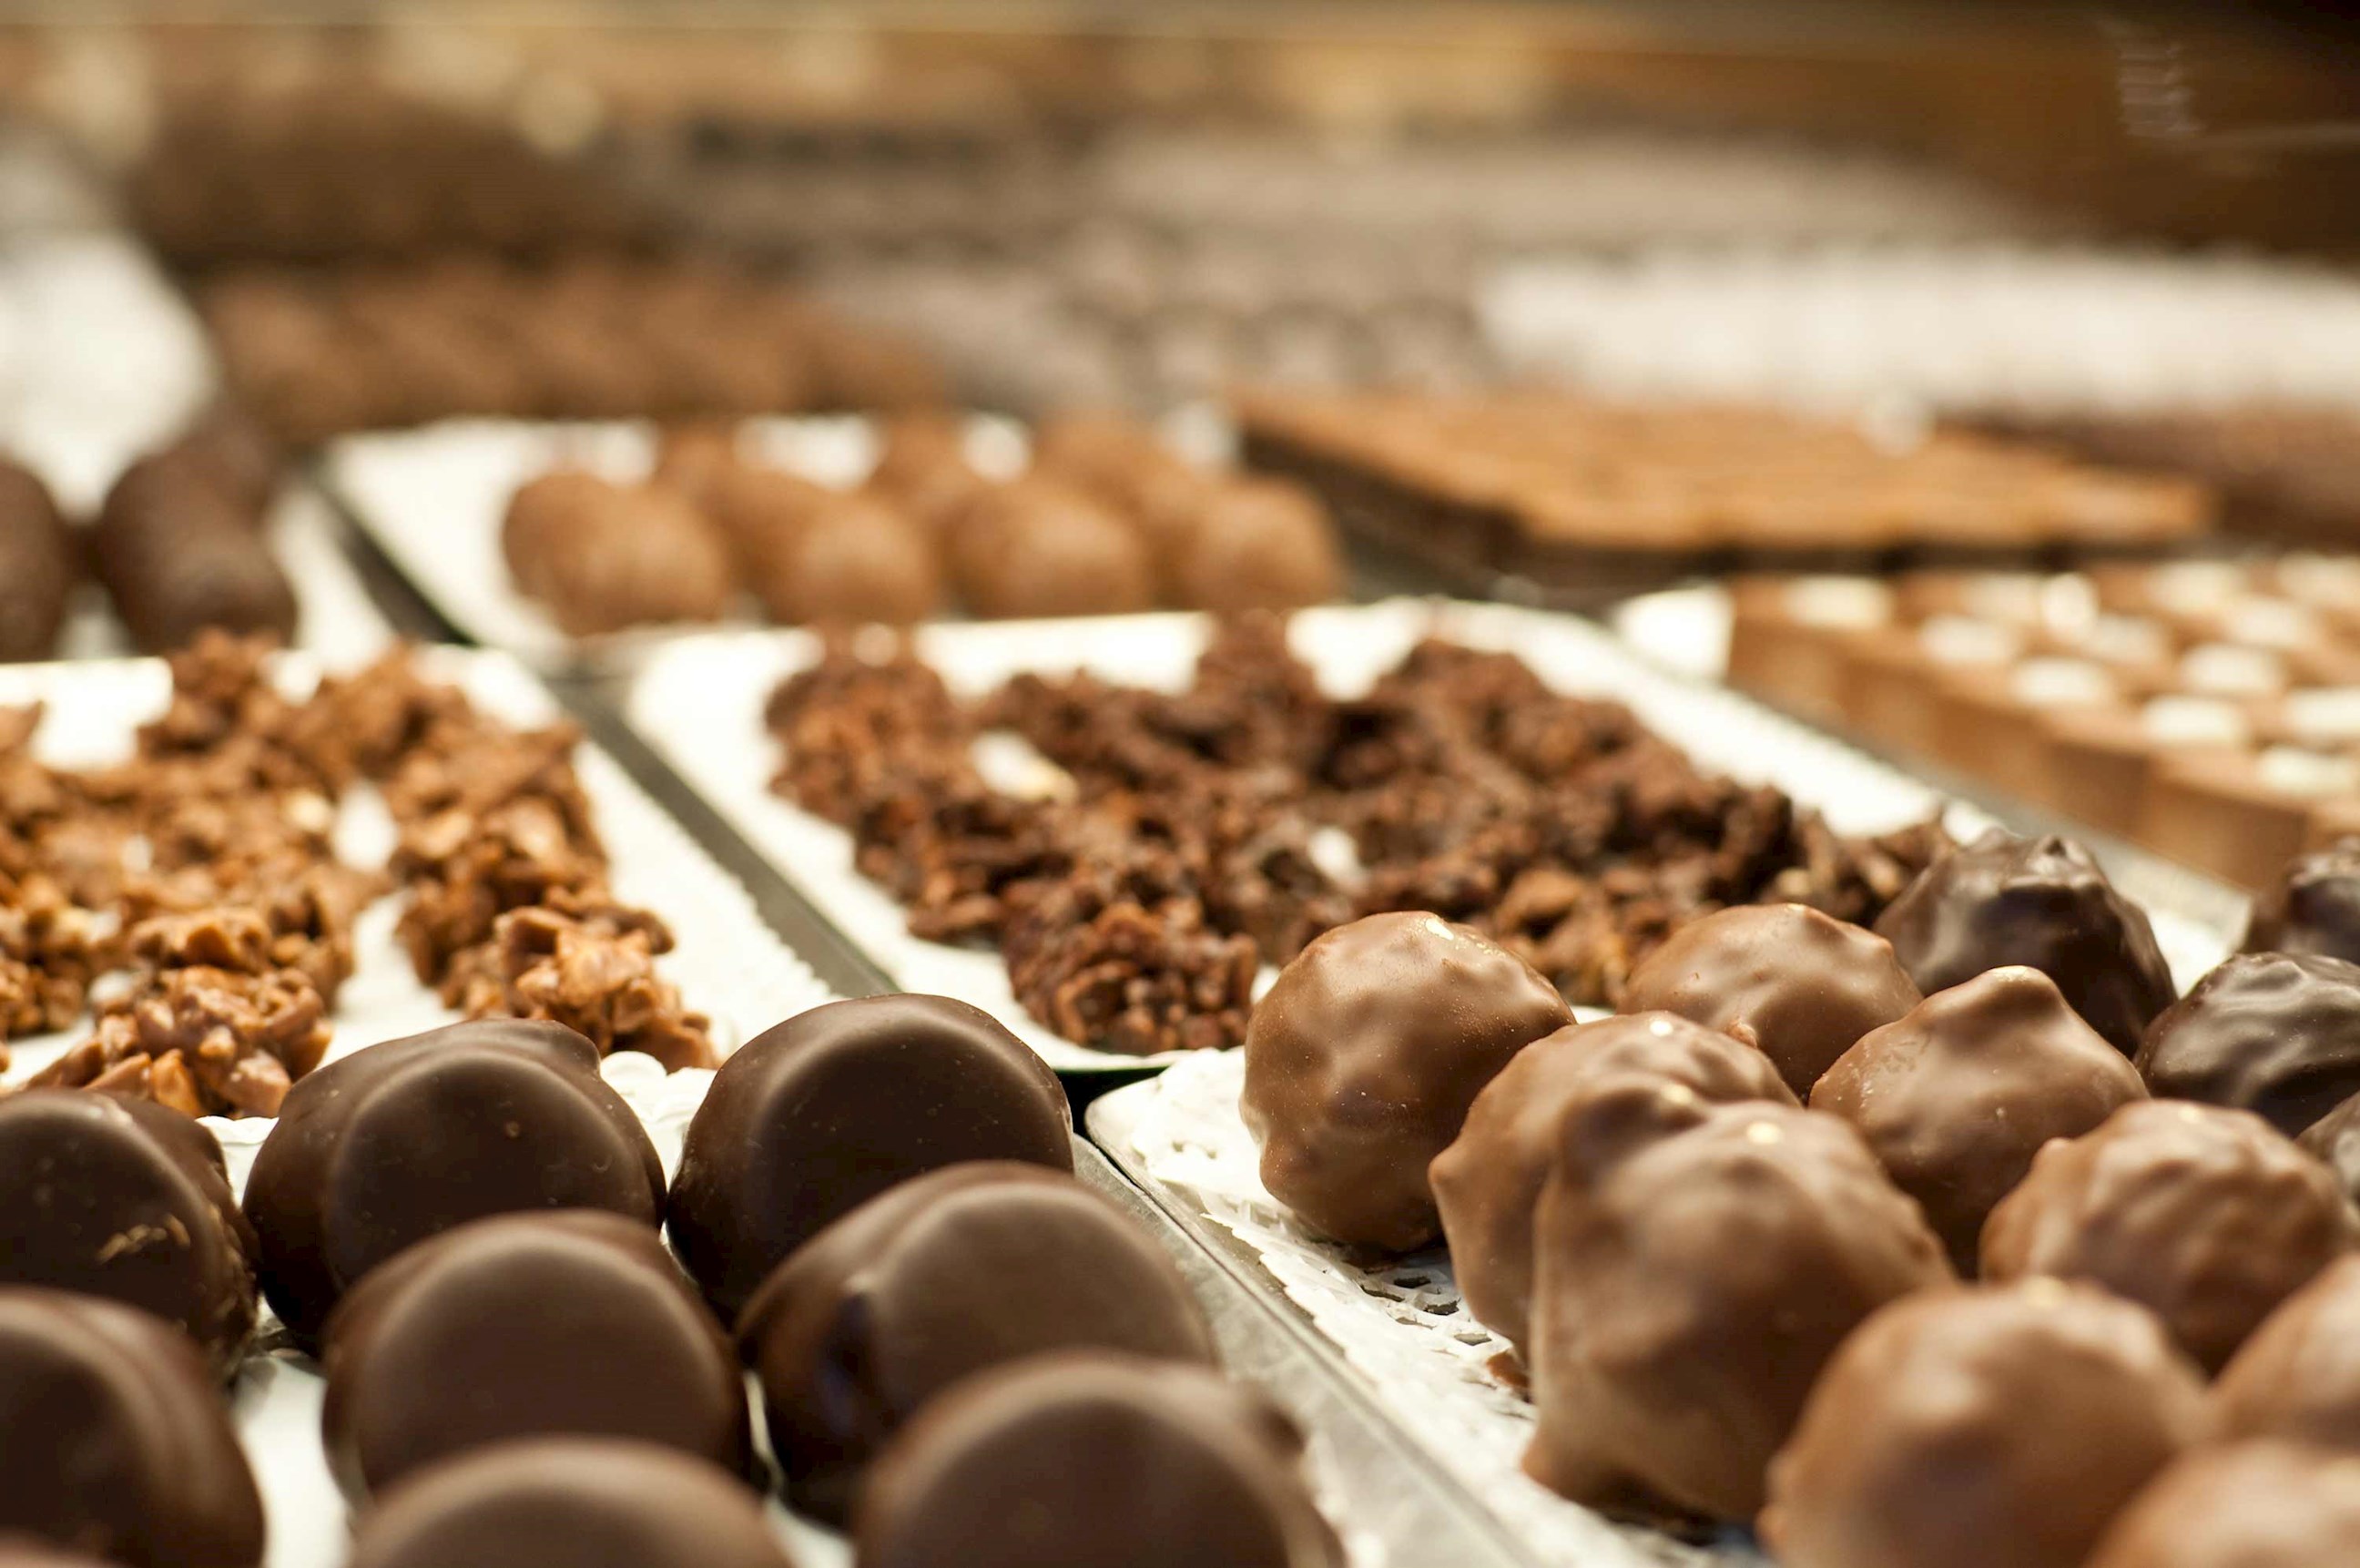 Why not visit a chocolatier and brewery in Bruges, Belgium